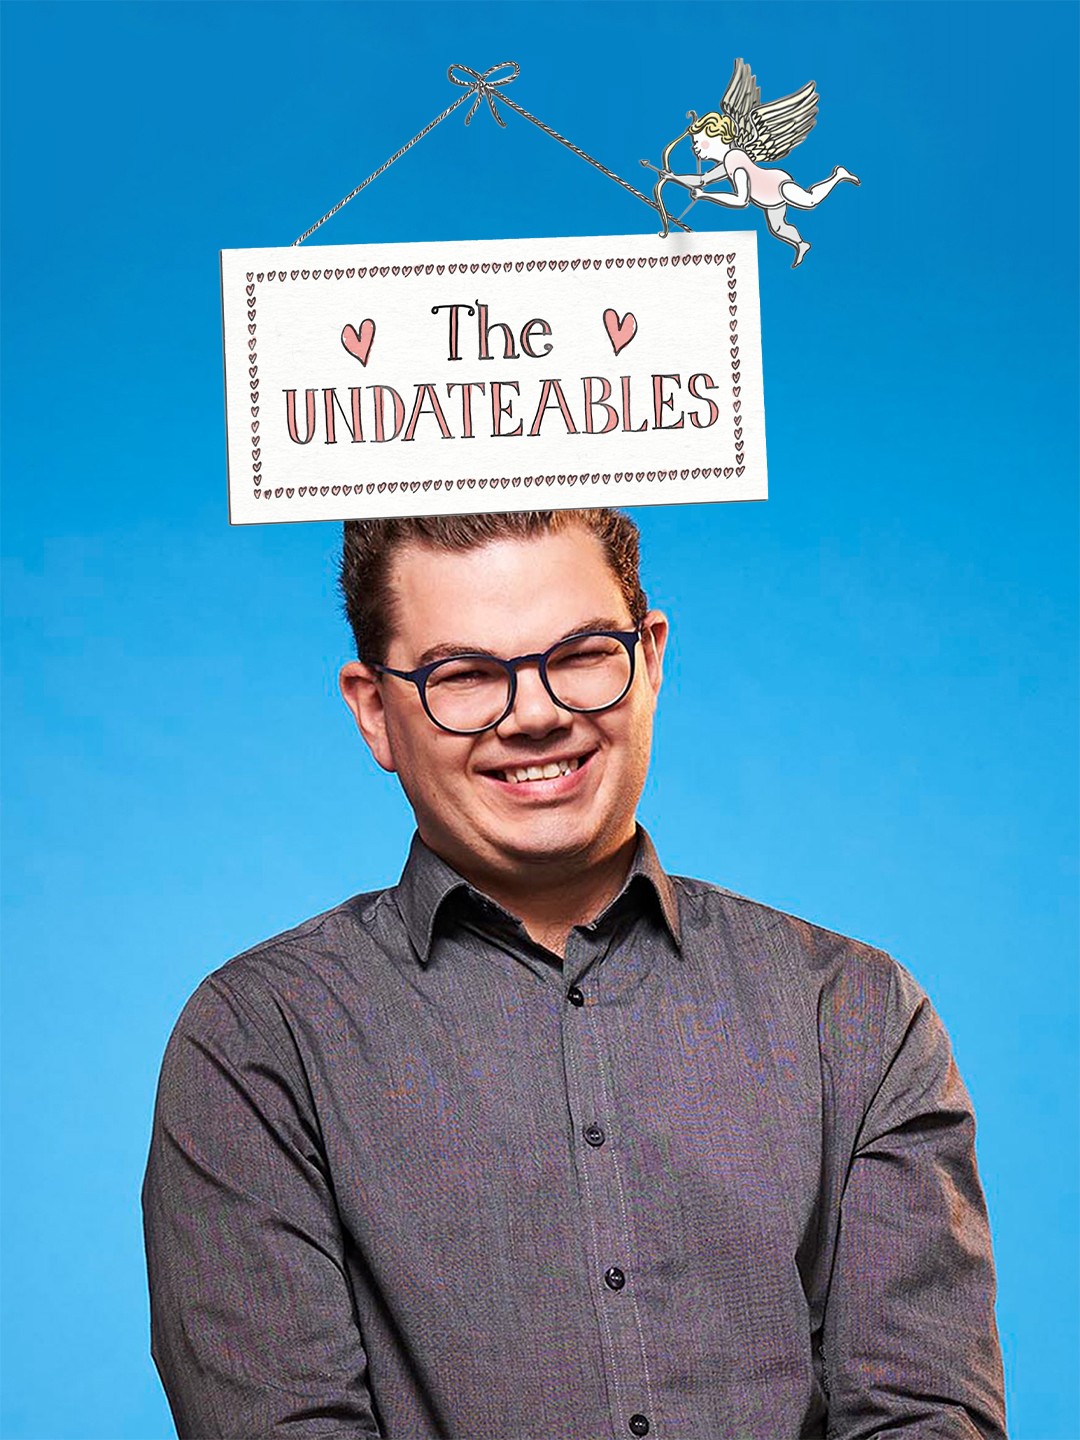 TV Watch: New comedy 'Undateable' premieres on NBC